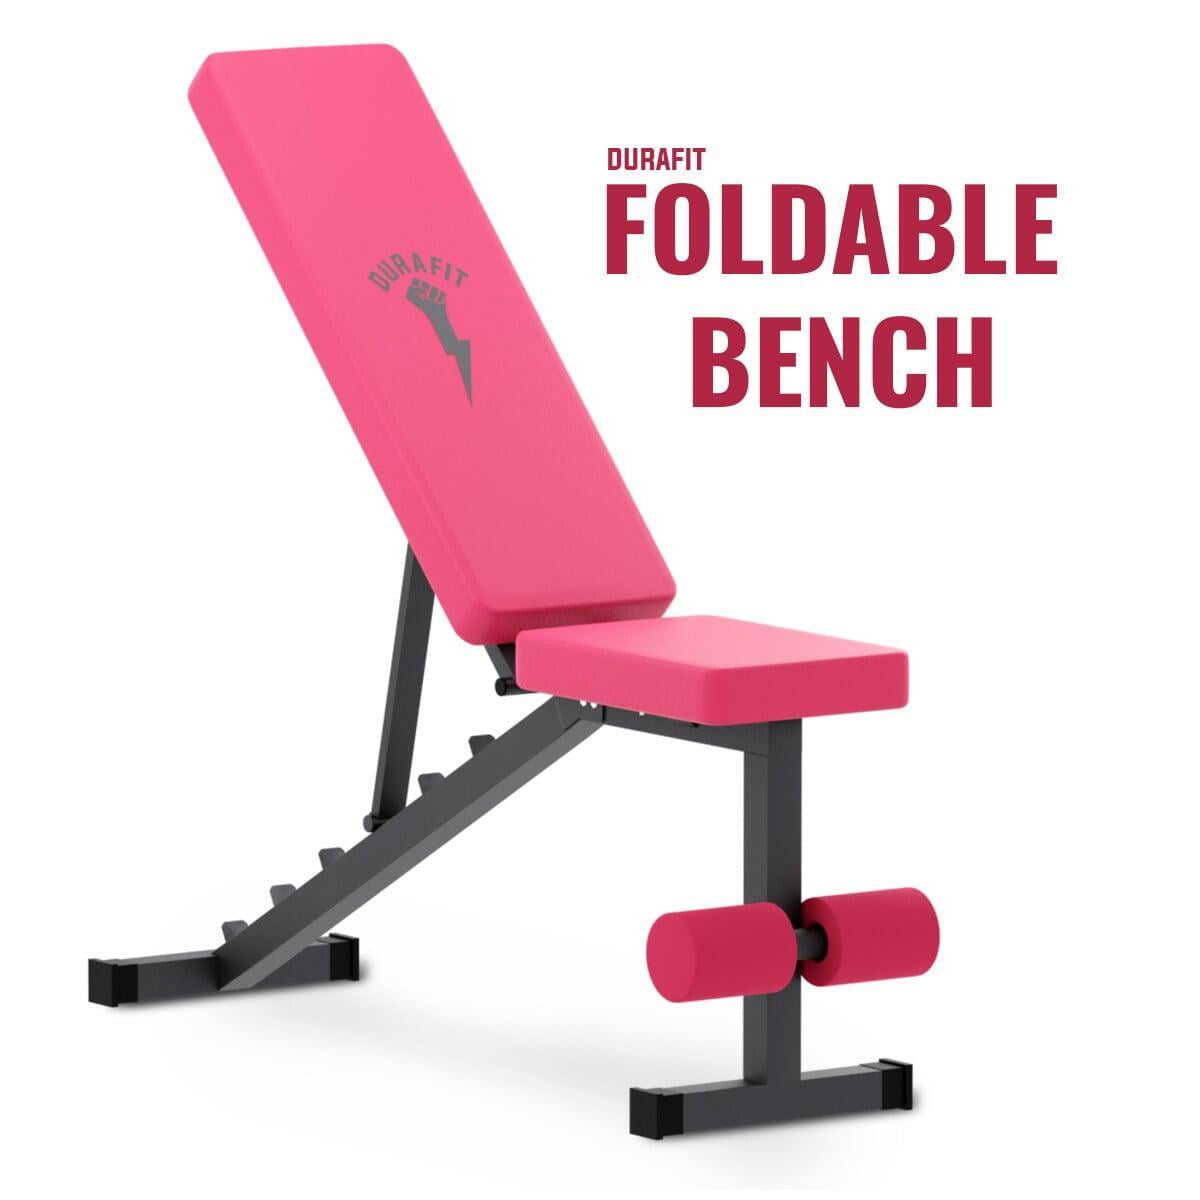 Durafit Foldable Bench FB01 on Multiple Benefits